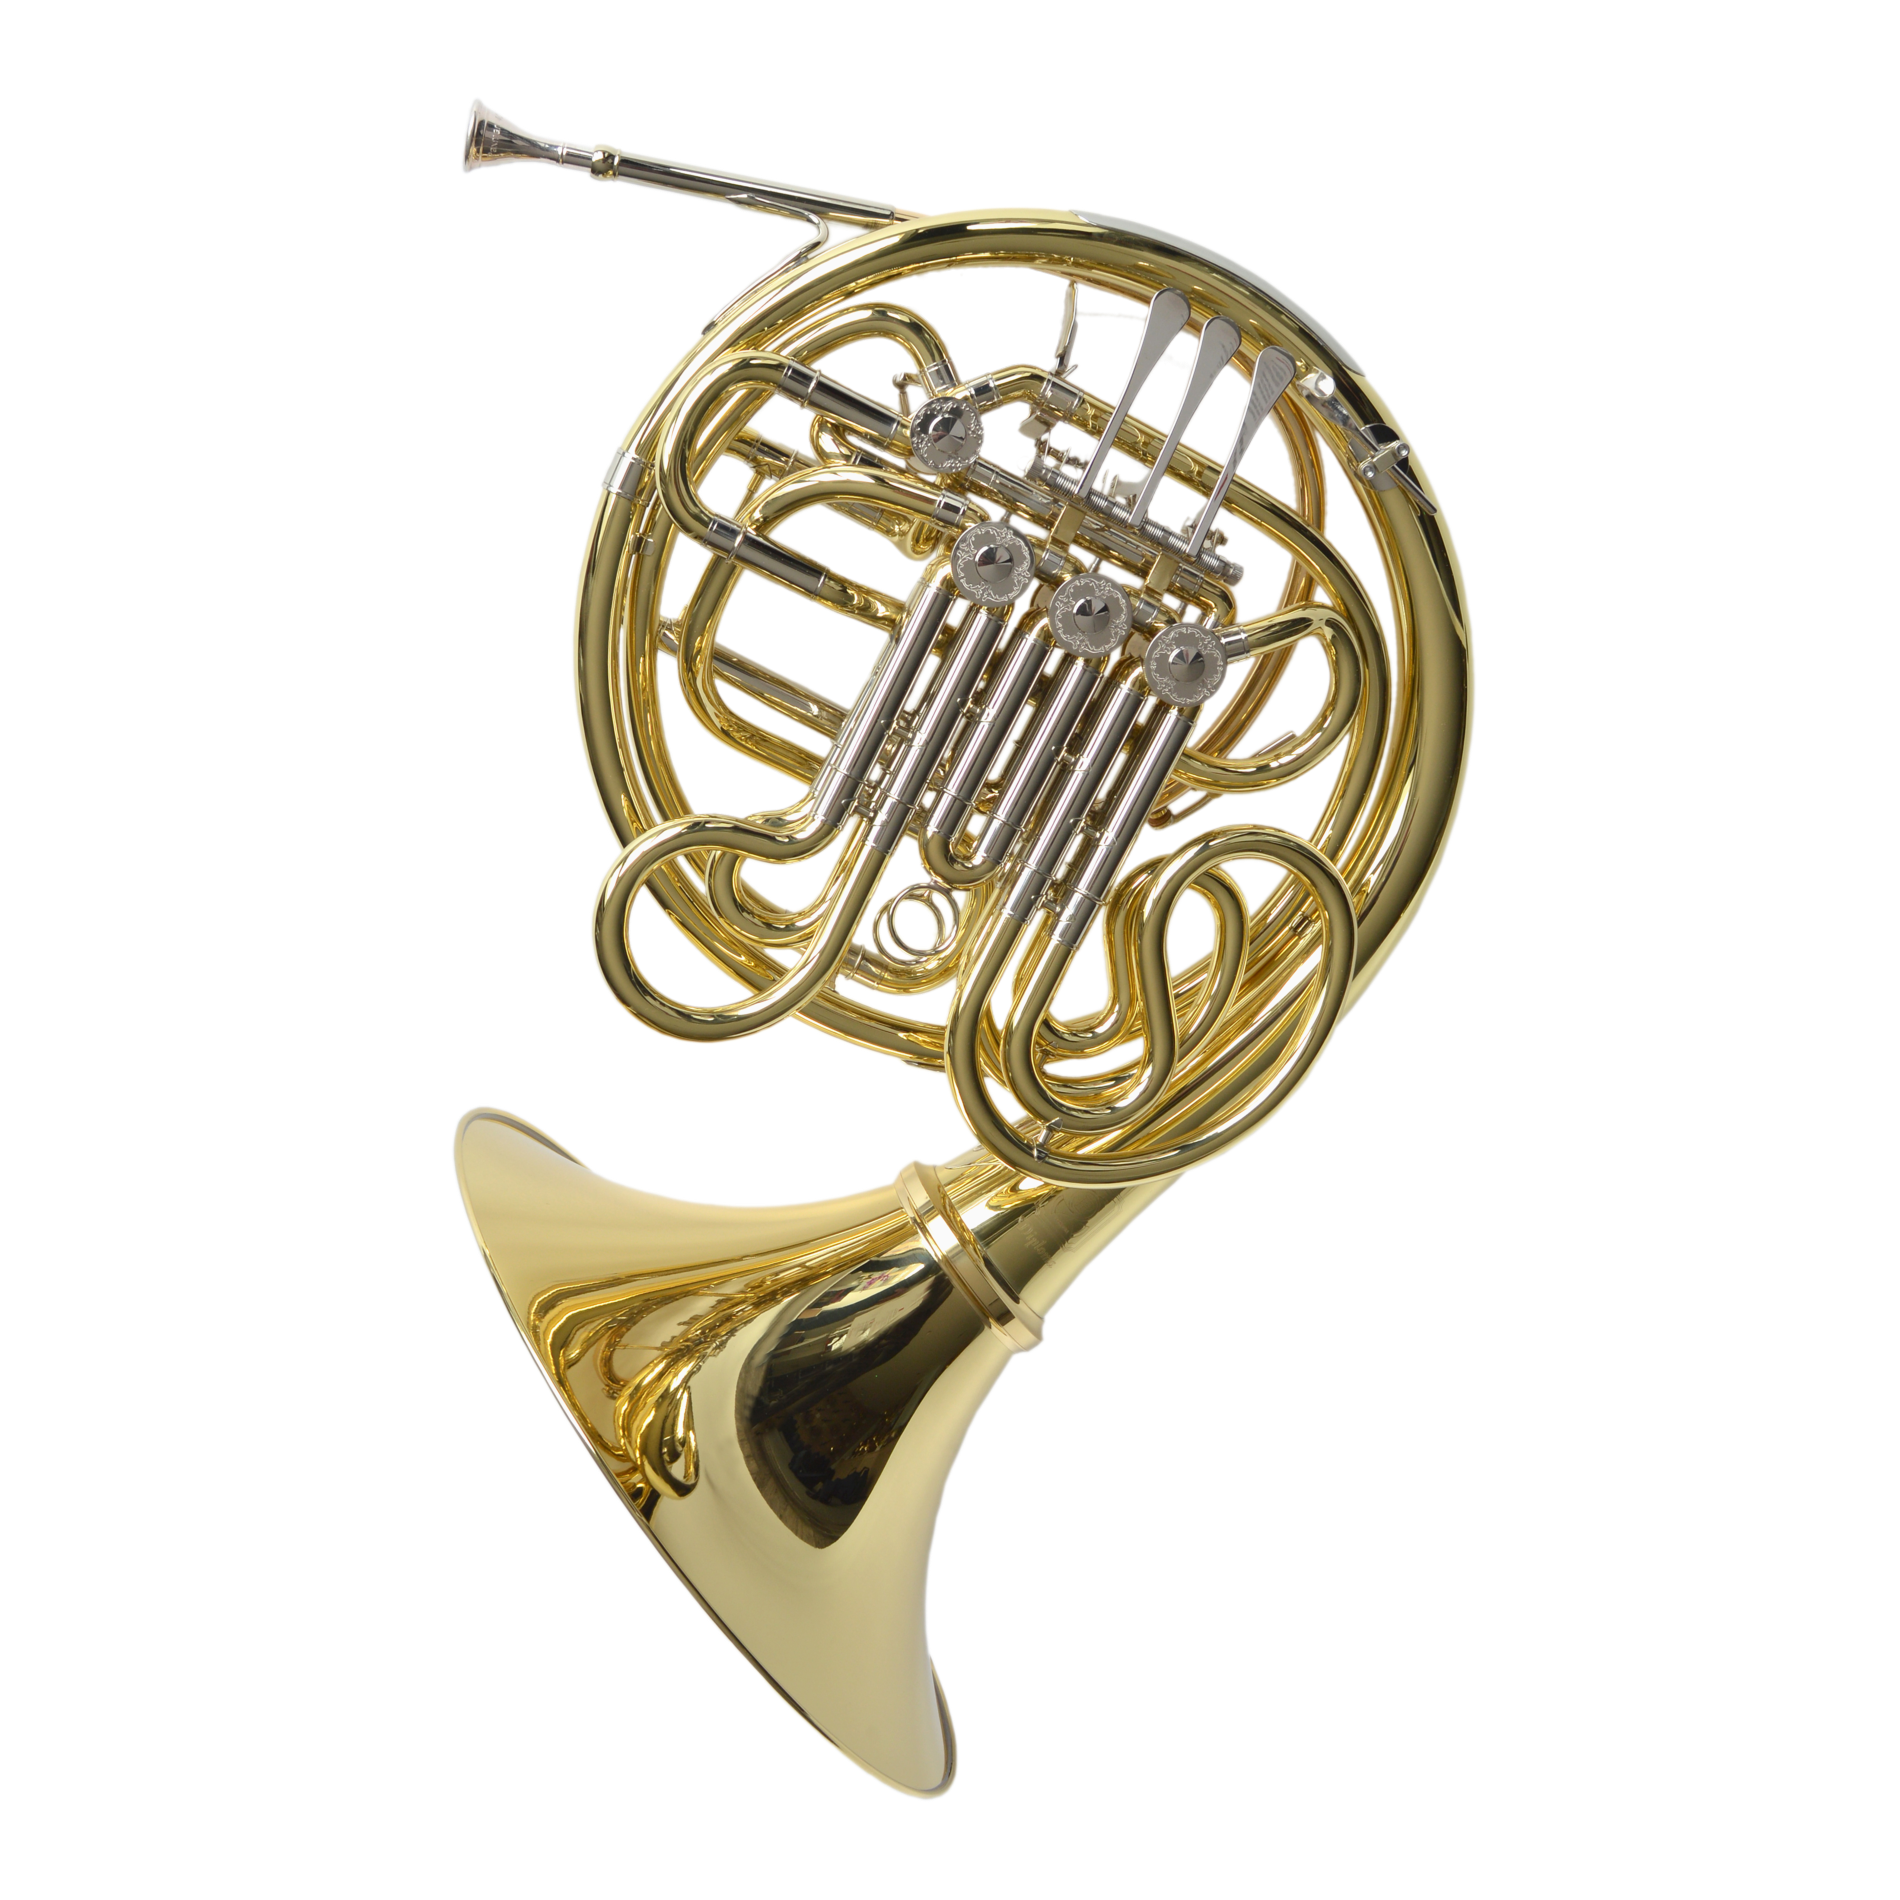 Paxman - Diploma Bb/F Full Double French Horn-French Horn-Paxman-Music Elements